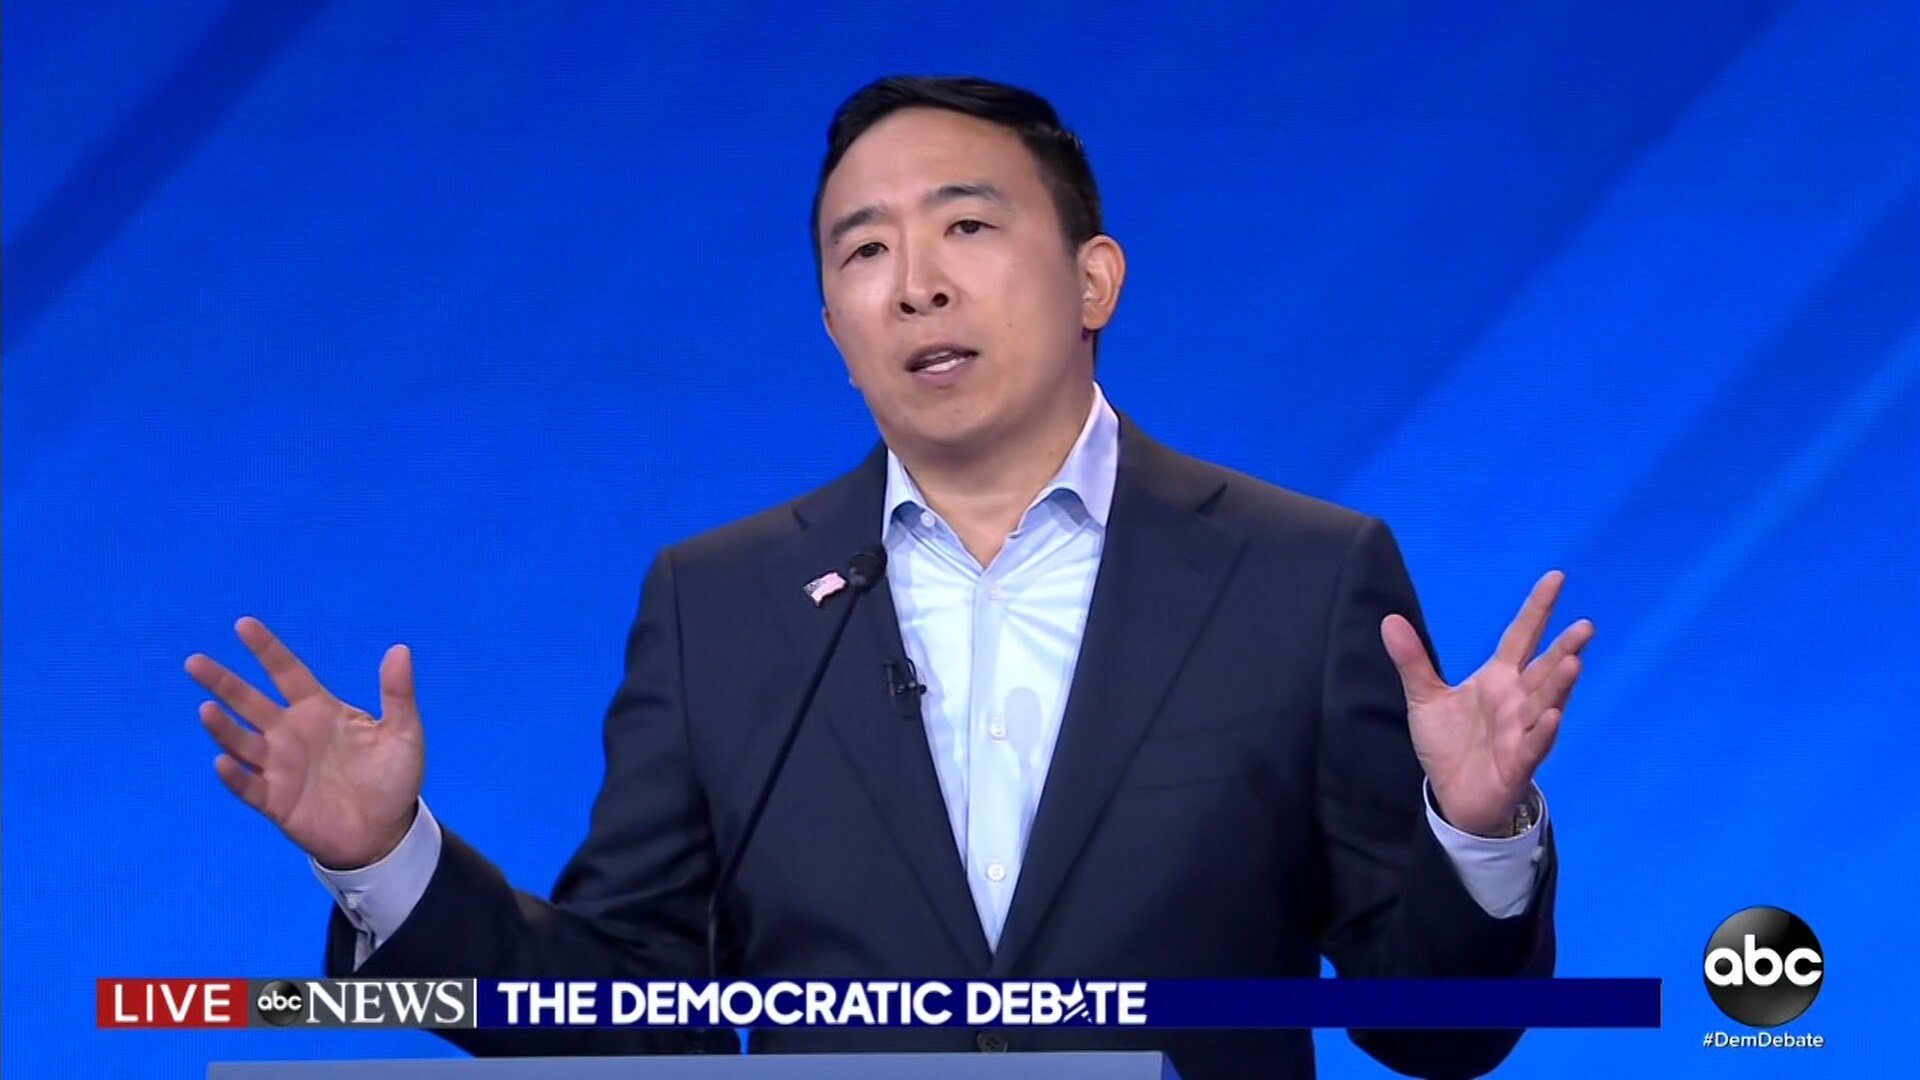 Andrew Yang’s plan to give 10 families $1,000 a month drew giggles, Oprah GIFs — and legal concerns